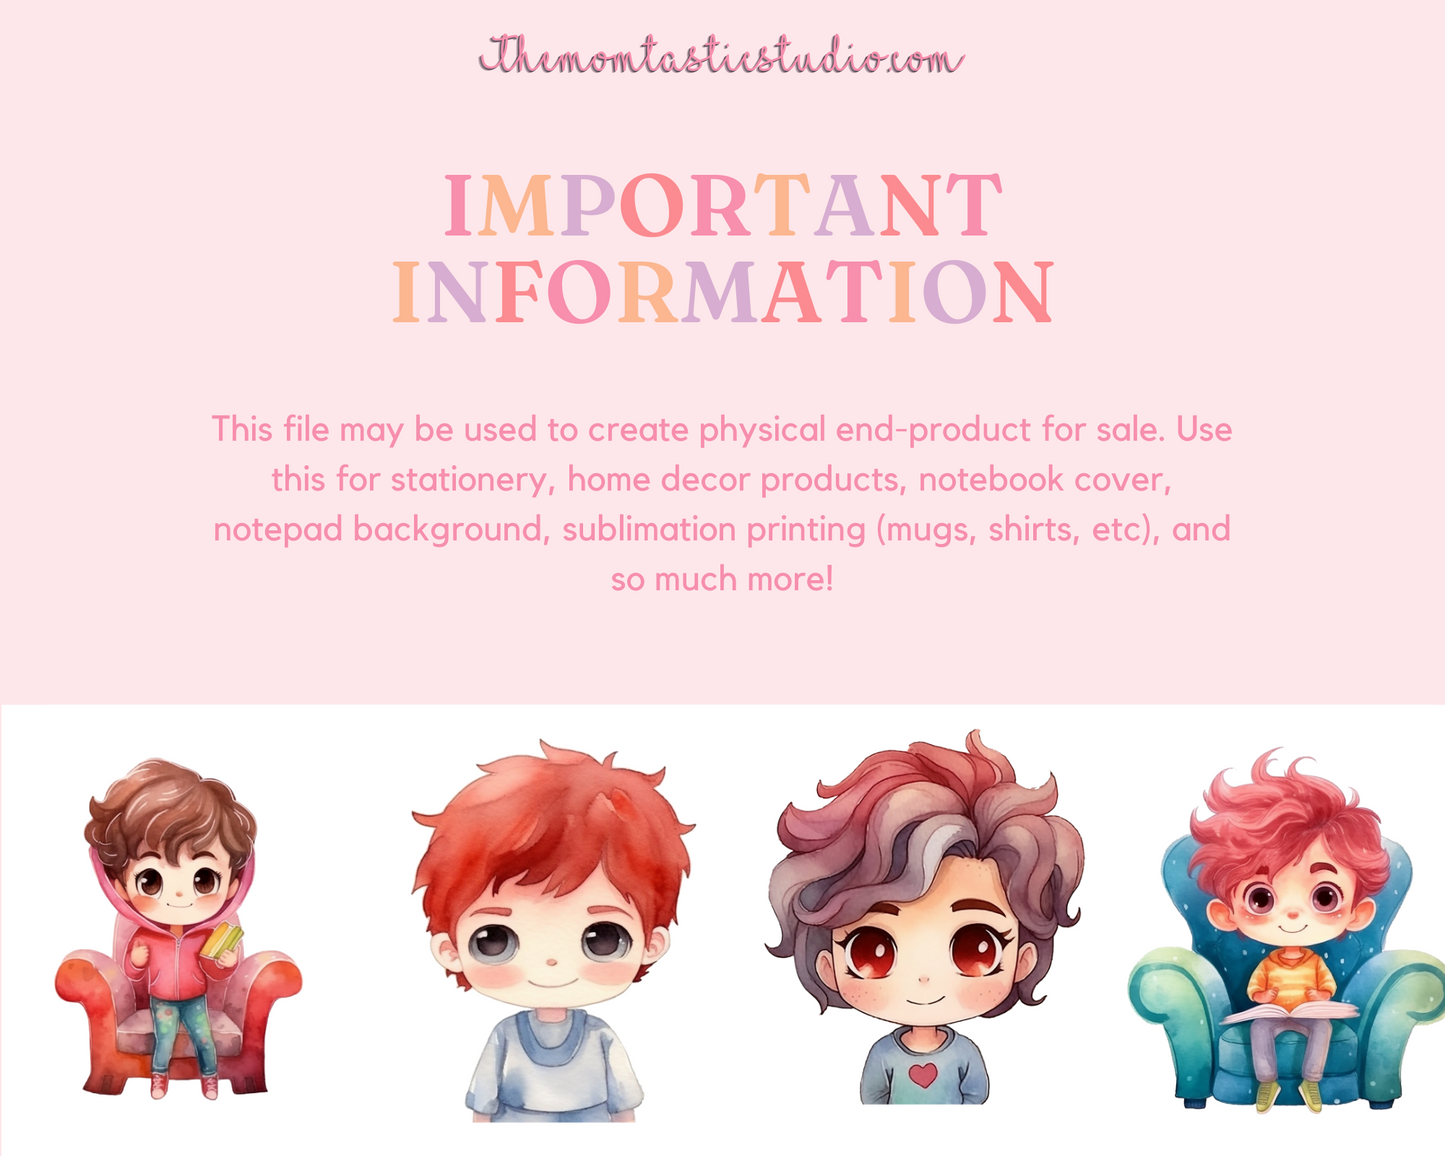 Cute Little Chibi Boys – High-Quality PNG - Transparent Background - Commercial Use